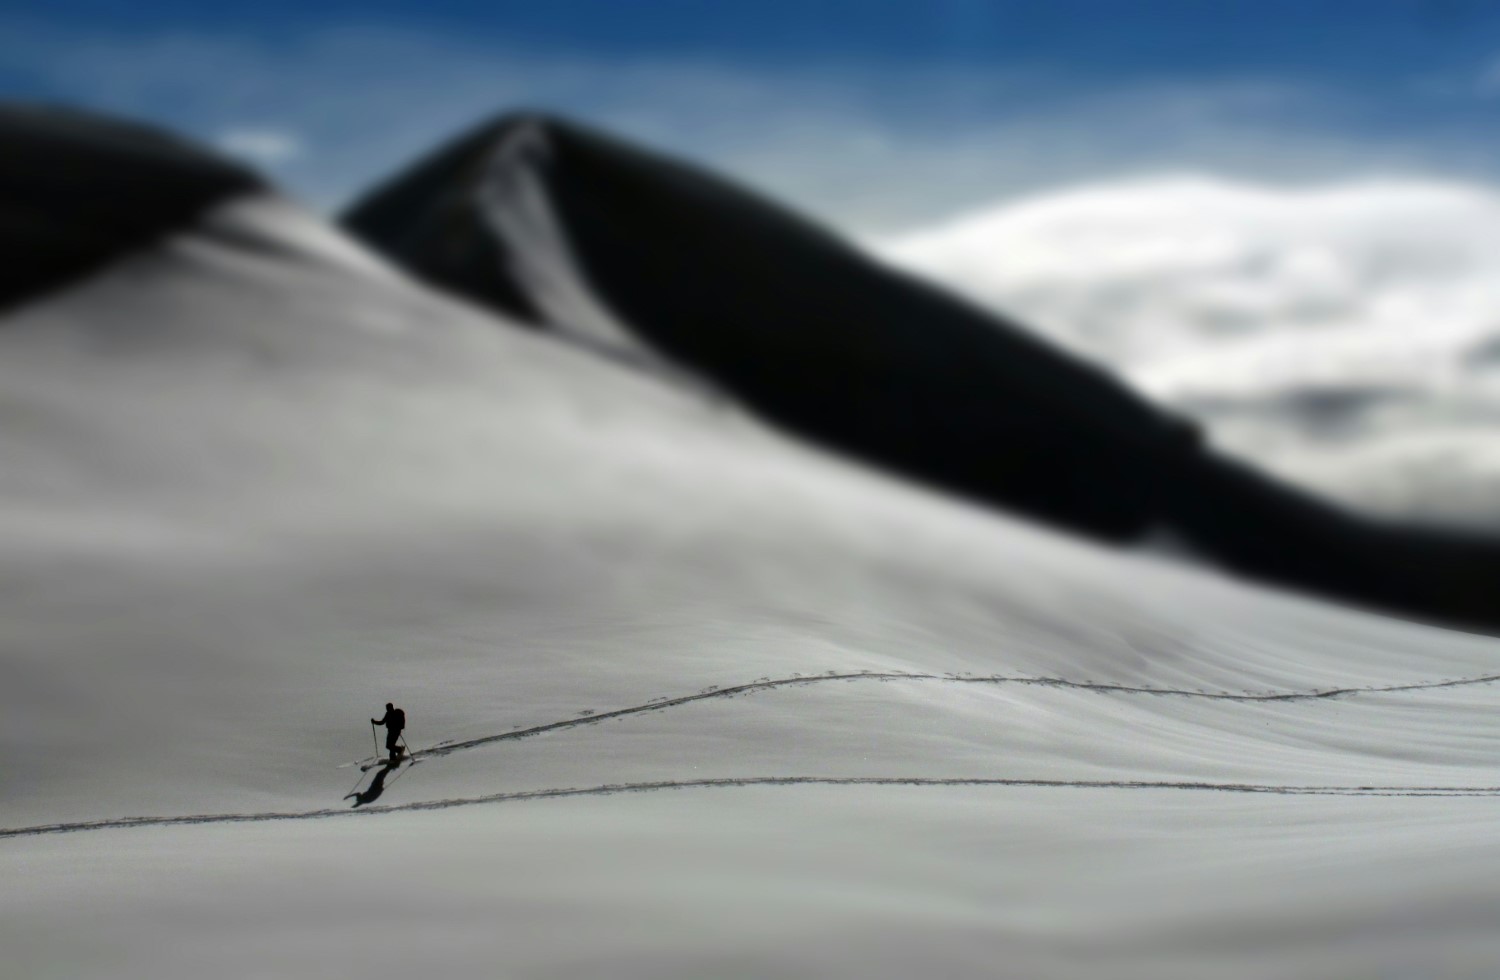 A tilt-shift photo example featuring a skier